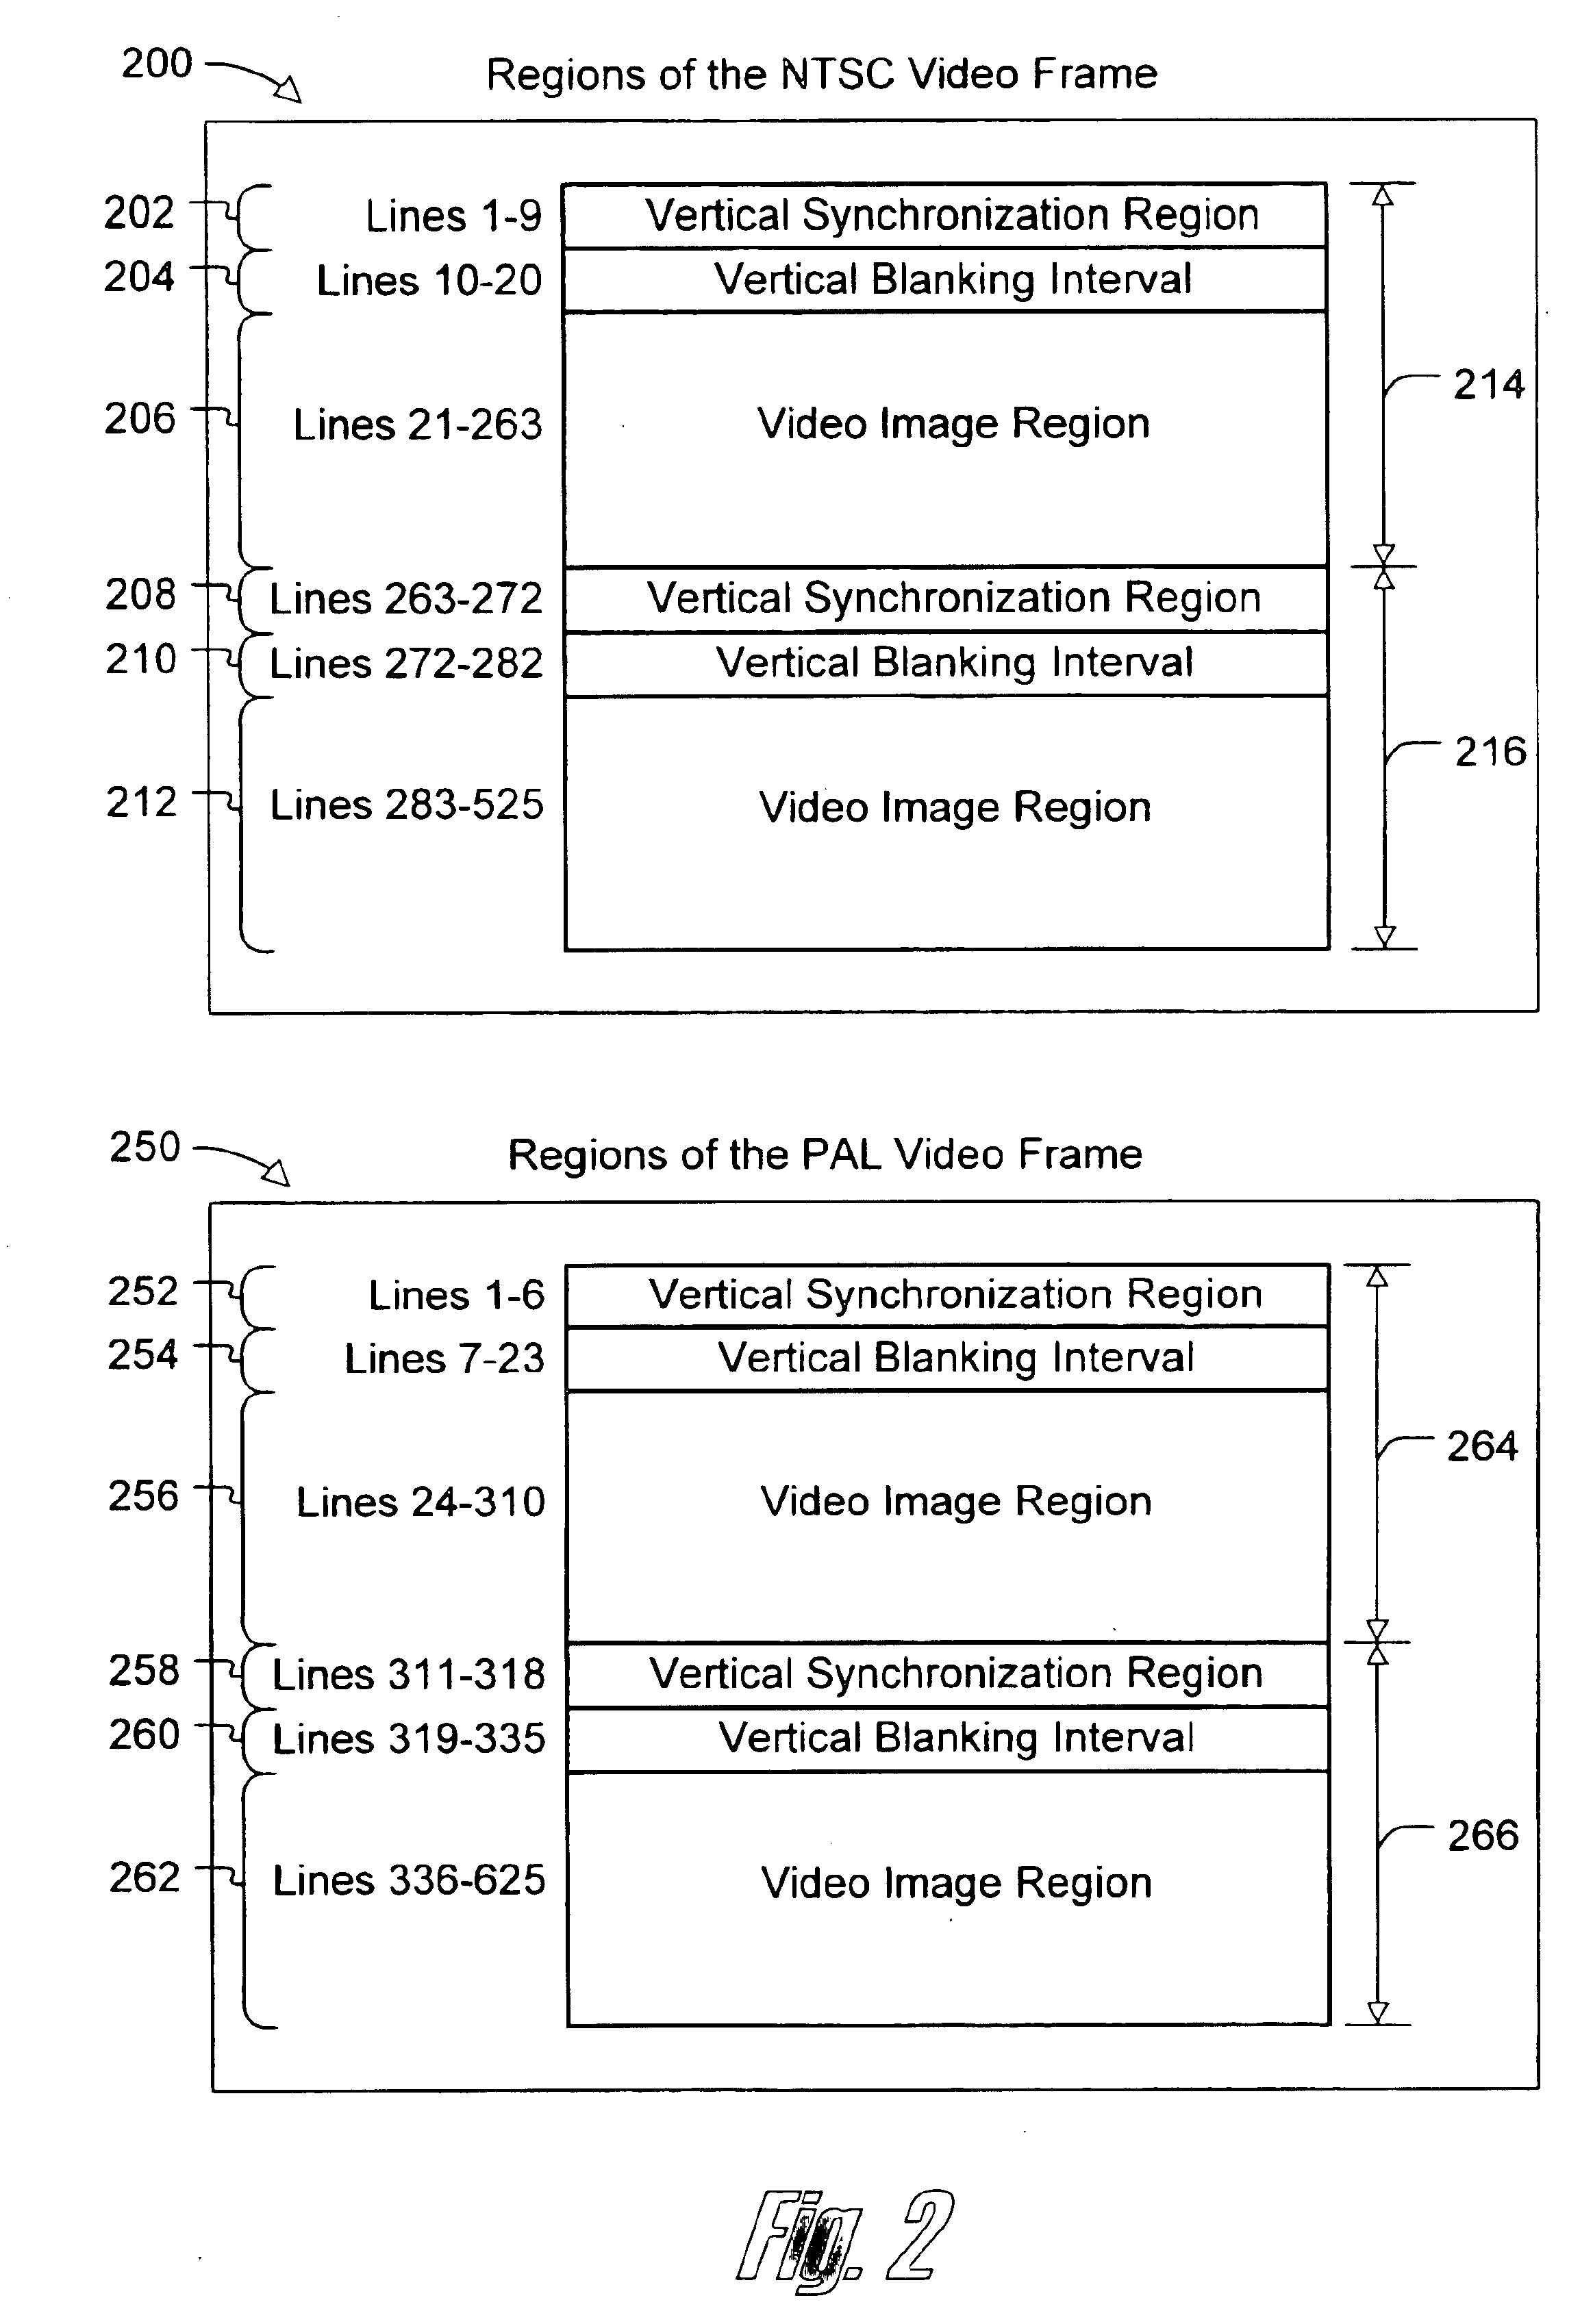 System and method for detecting modifications of video signals designed to prevent copying by traditional video tape recorders